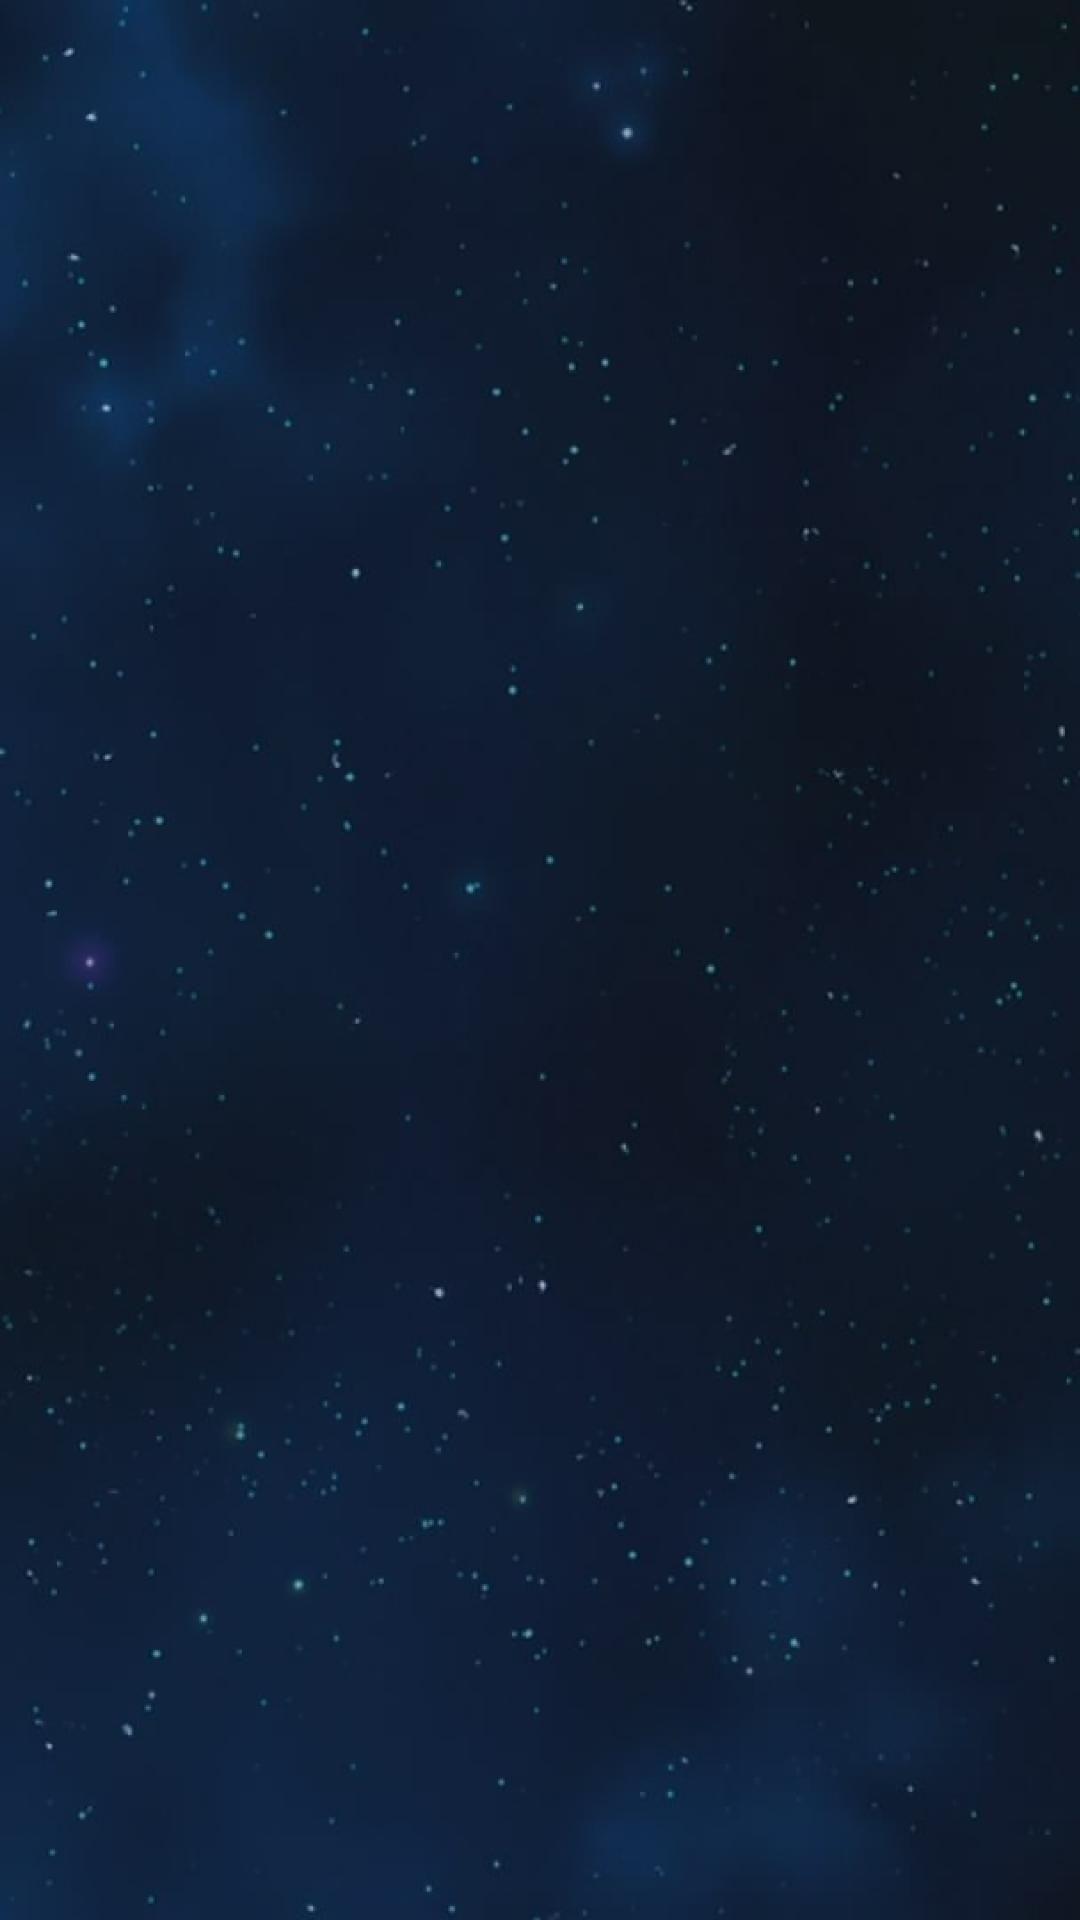 ScreenHeaven: Background outer space stars desktop and mobile